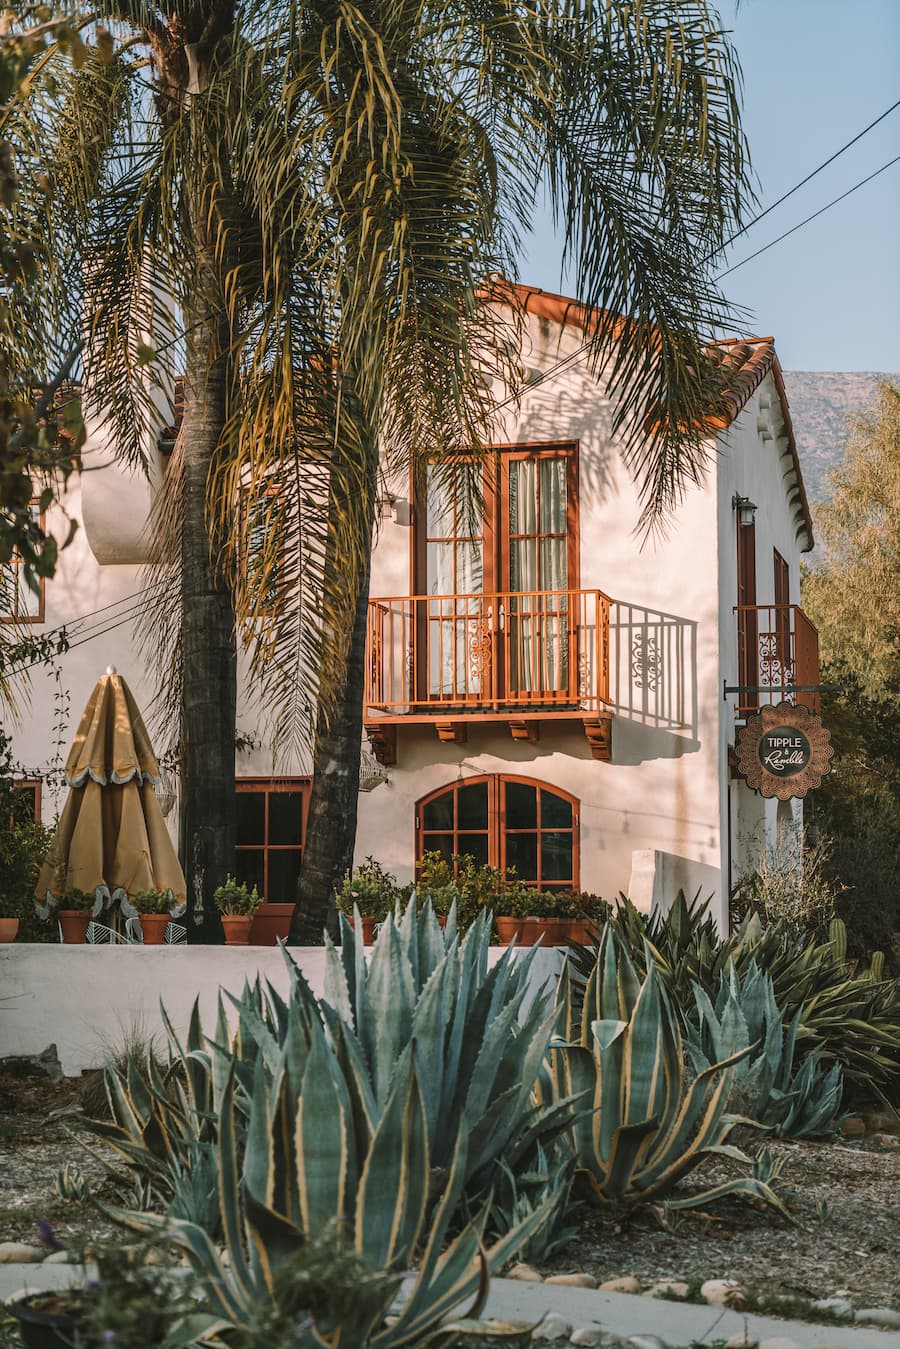 Palm tree and Spanish house in Ojai